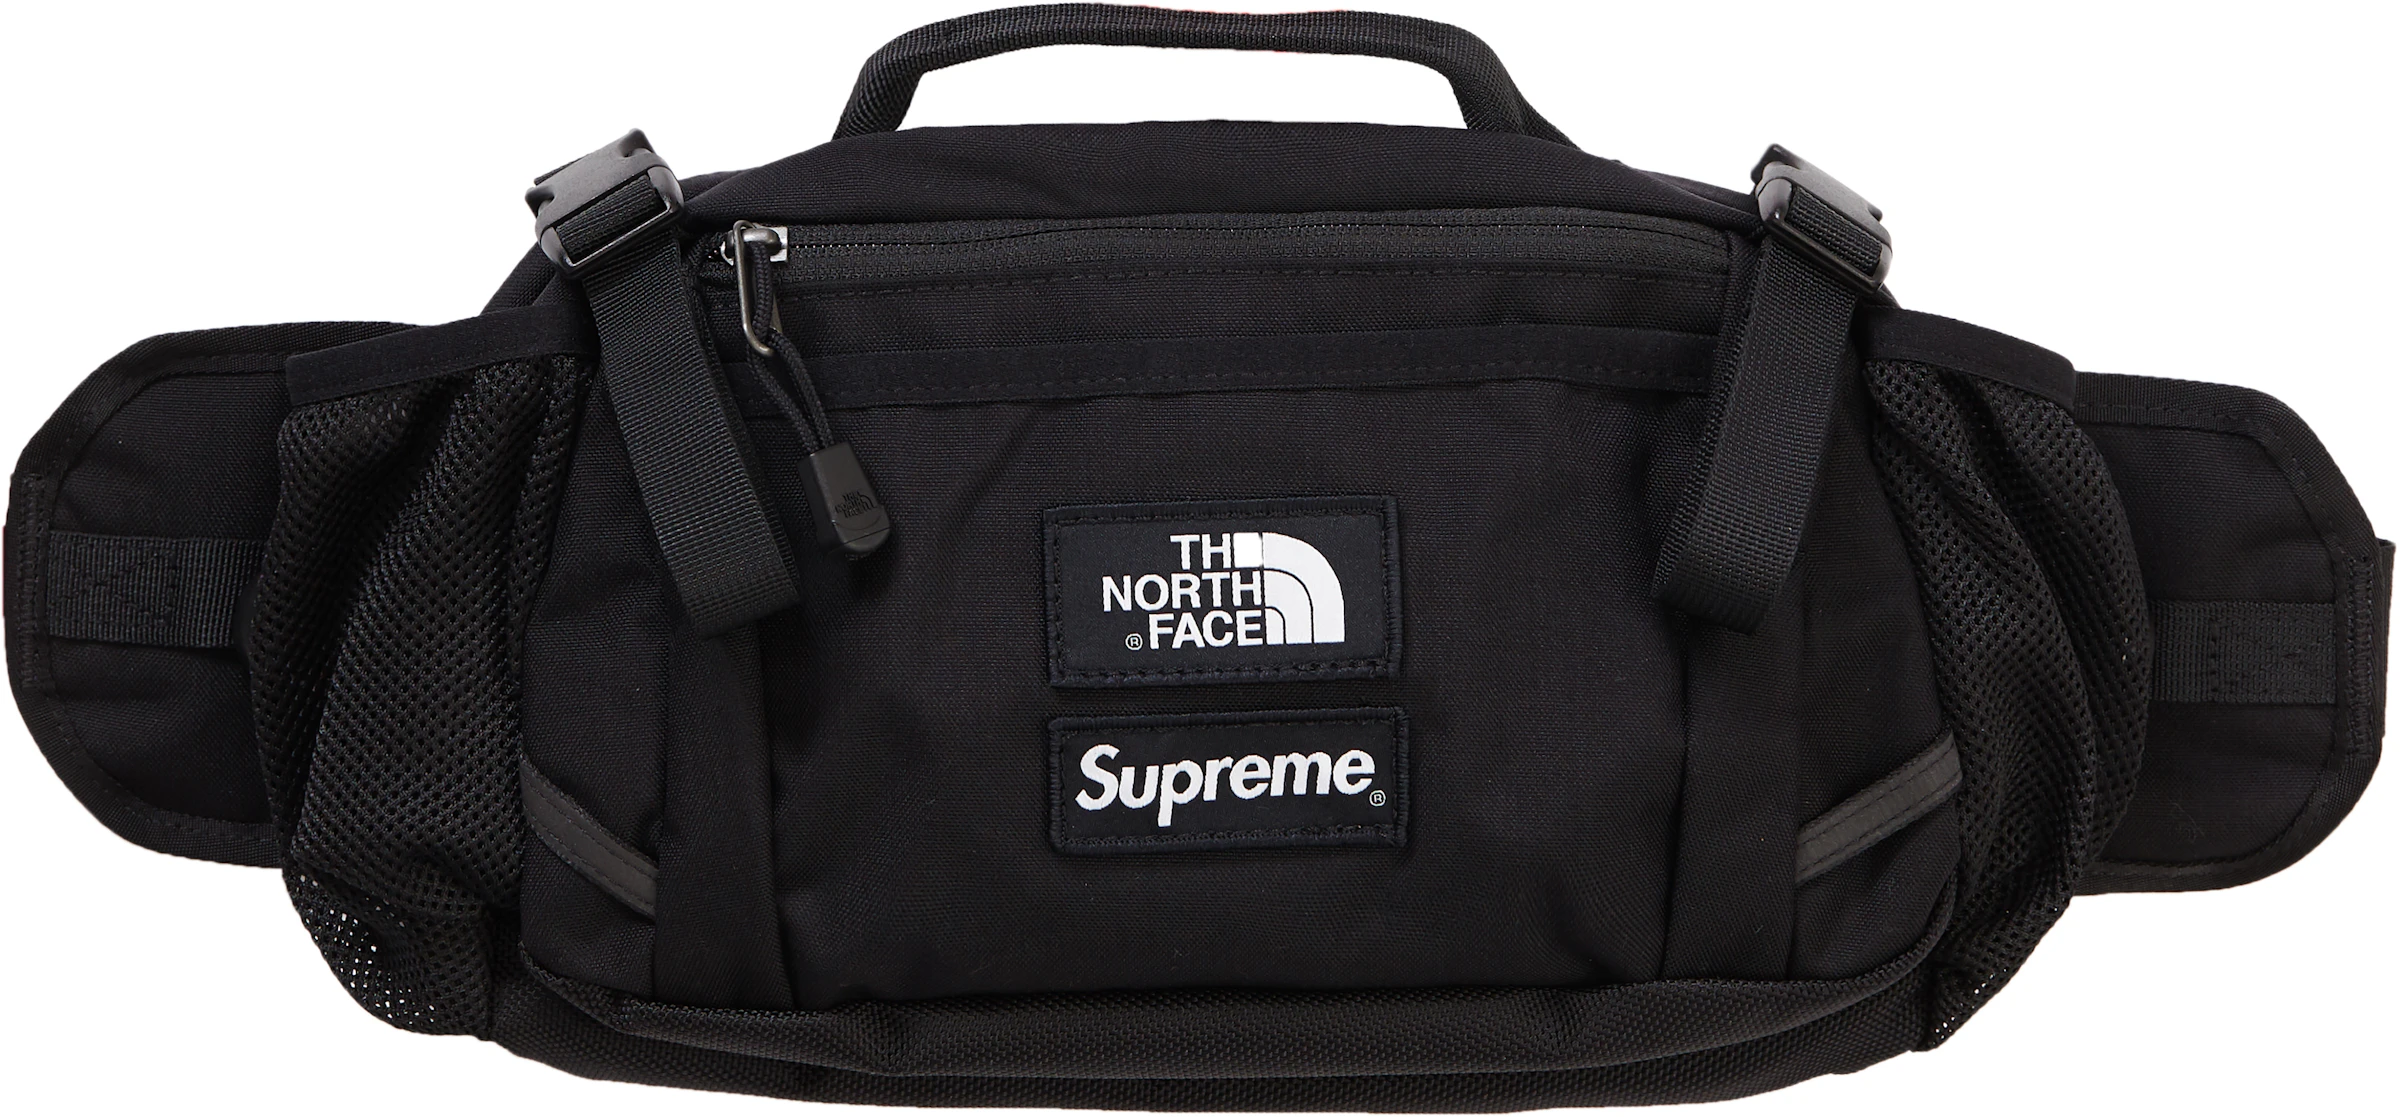 Supreme The Face Expedition Waist Bag - FW18 US